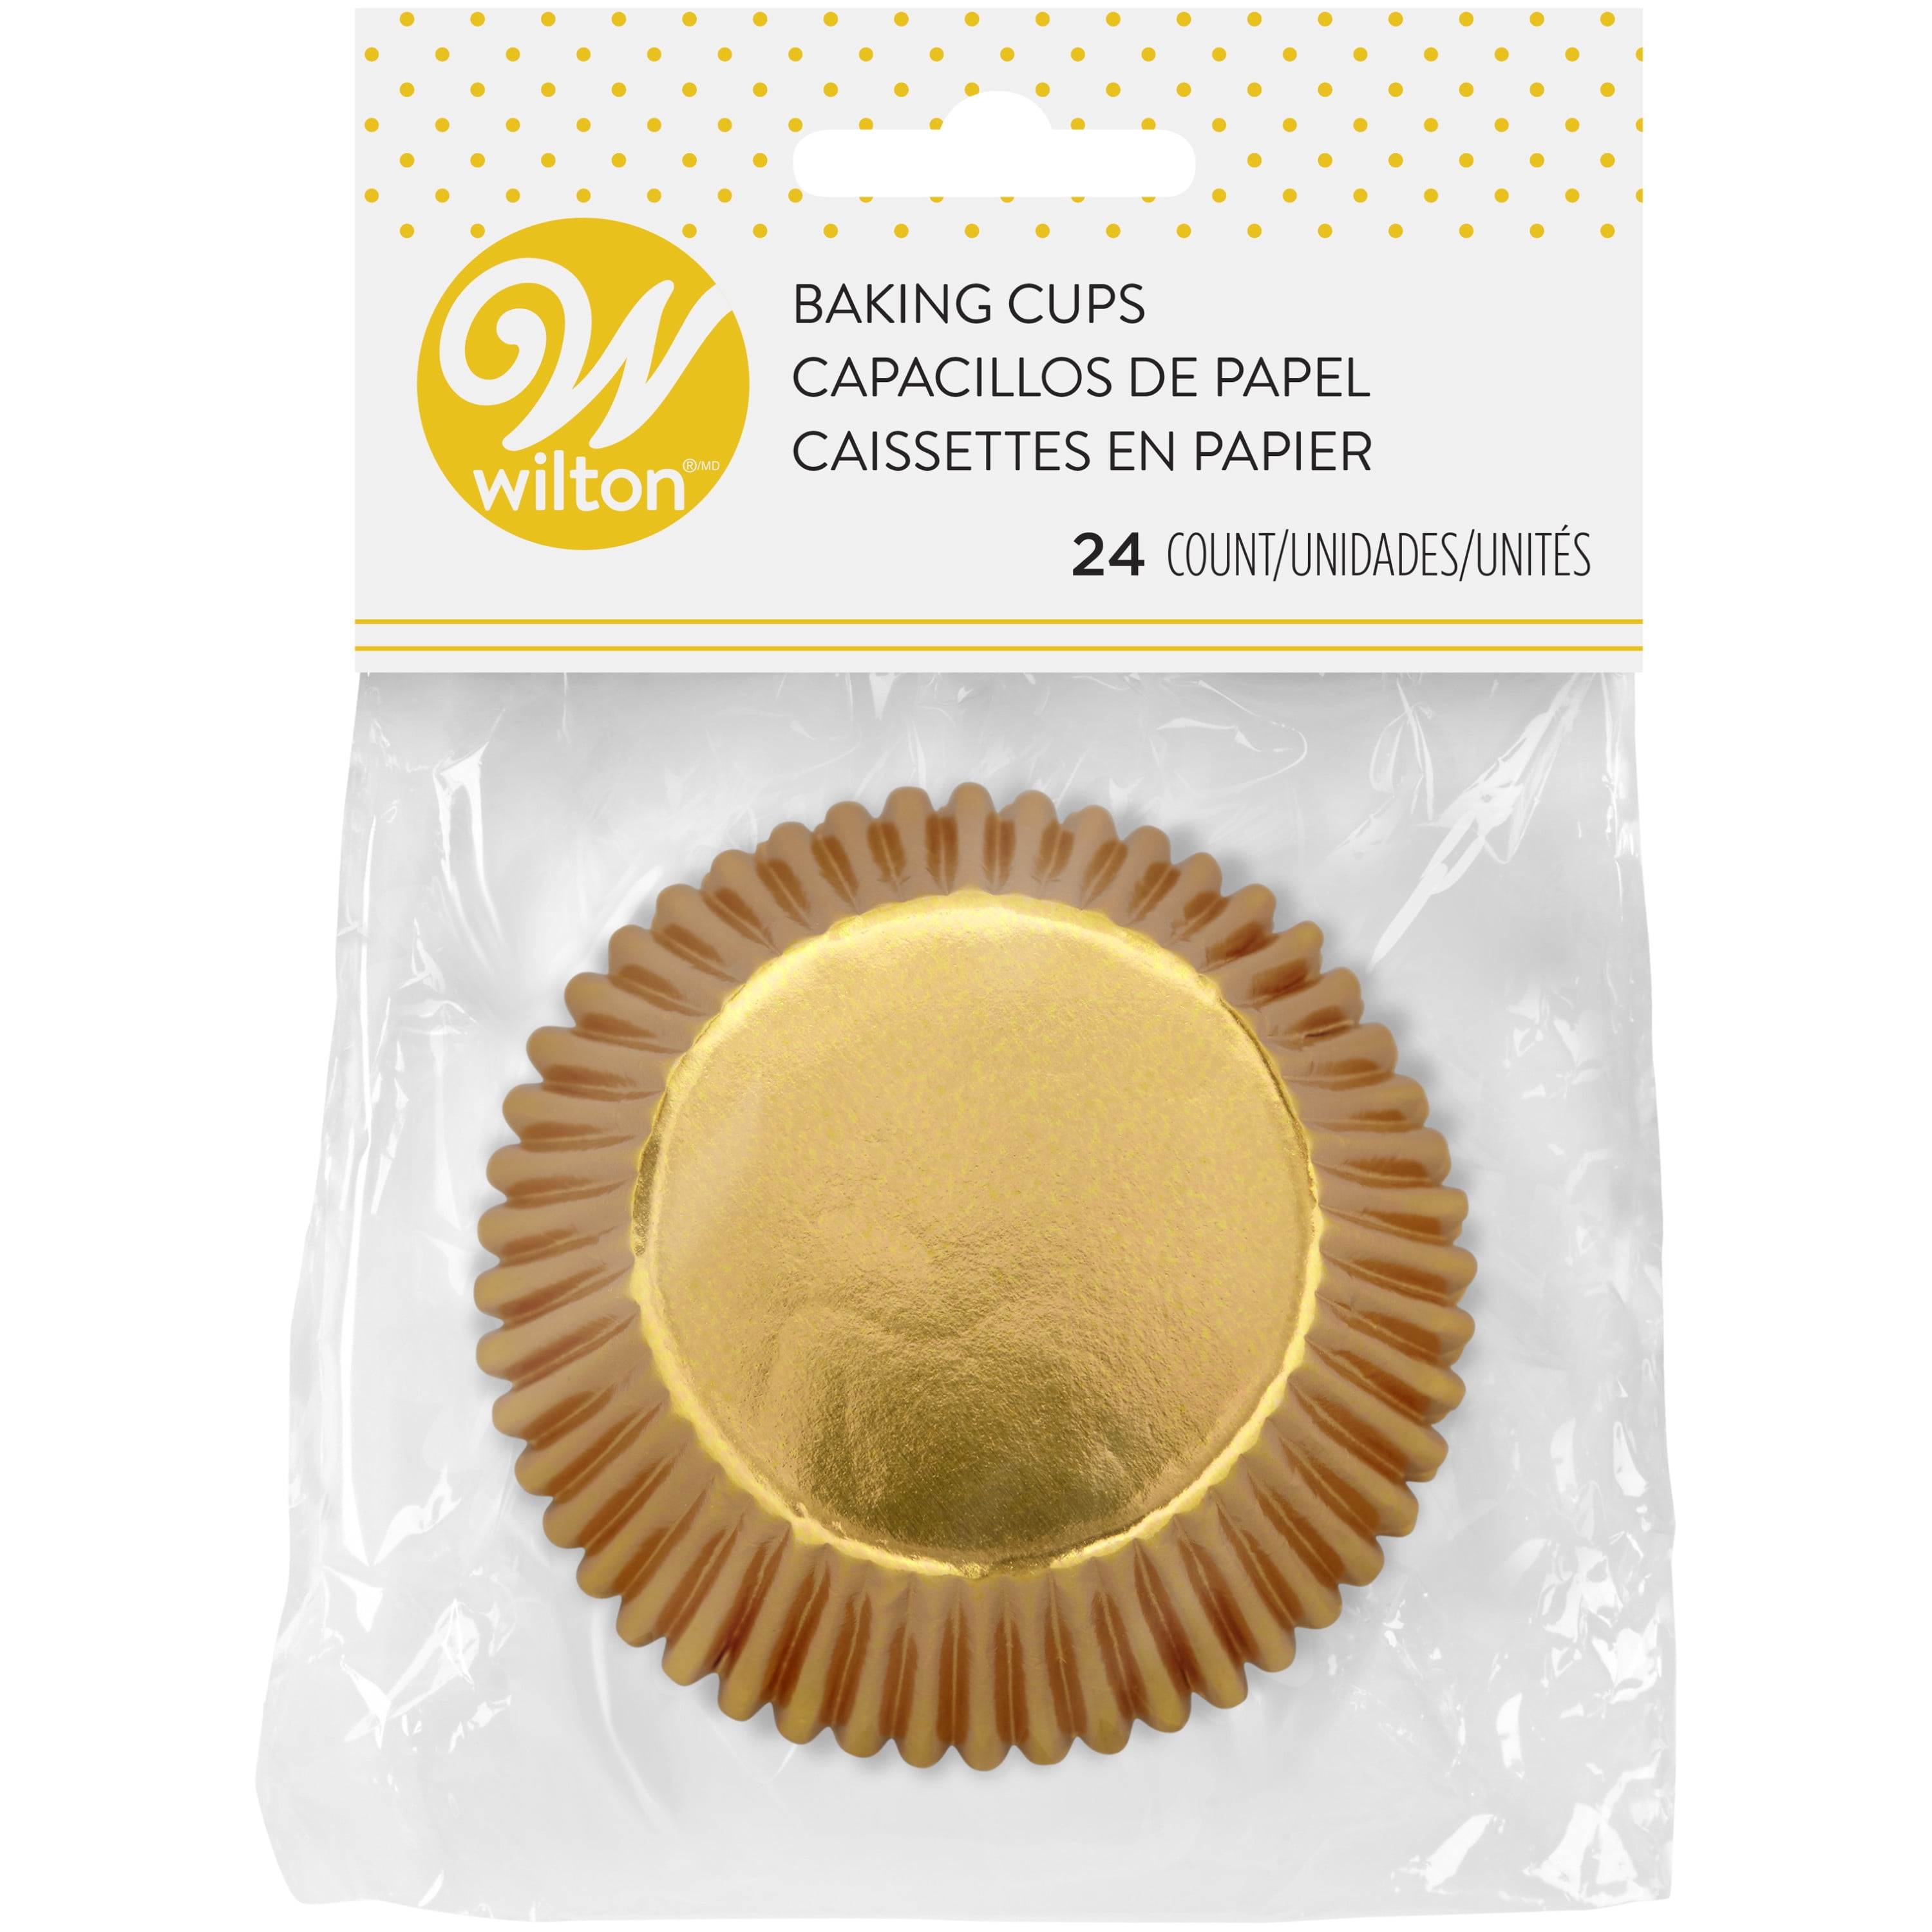 STANDARD Foil Cupcake Liners / Baking Cups – 50 ct – SHINY GOLD